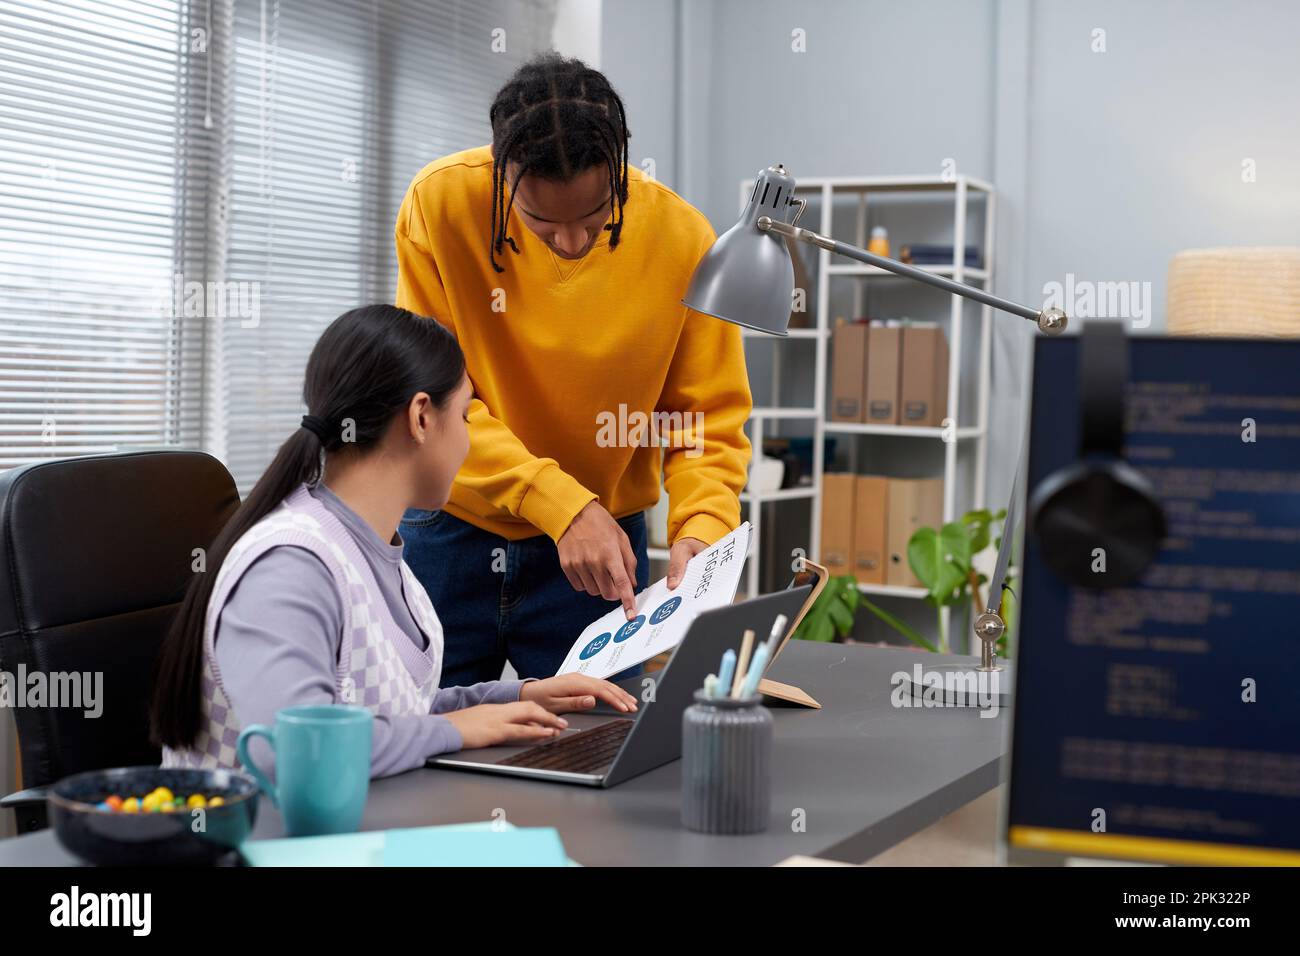 Portrait of two young people discussing document while collaborating on project in IT development office Stock Photo